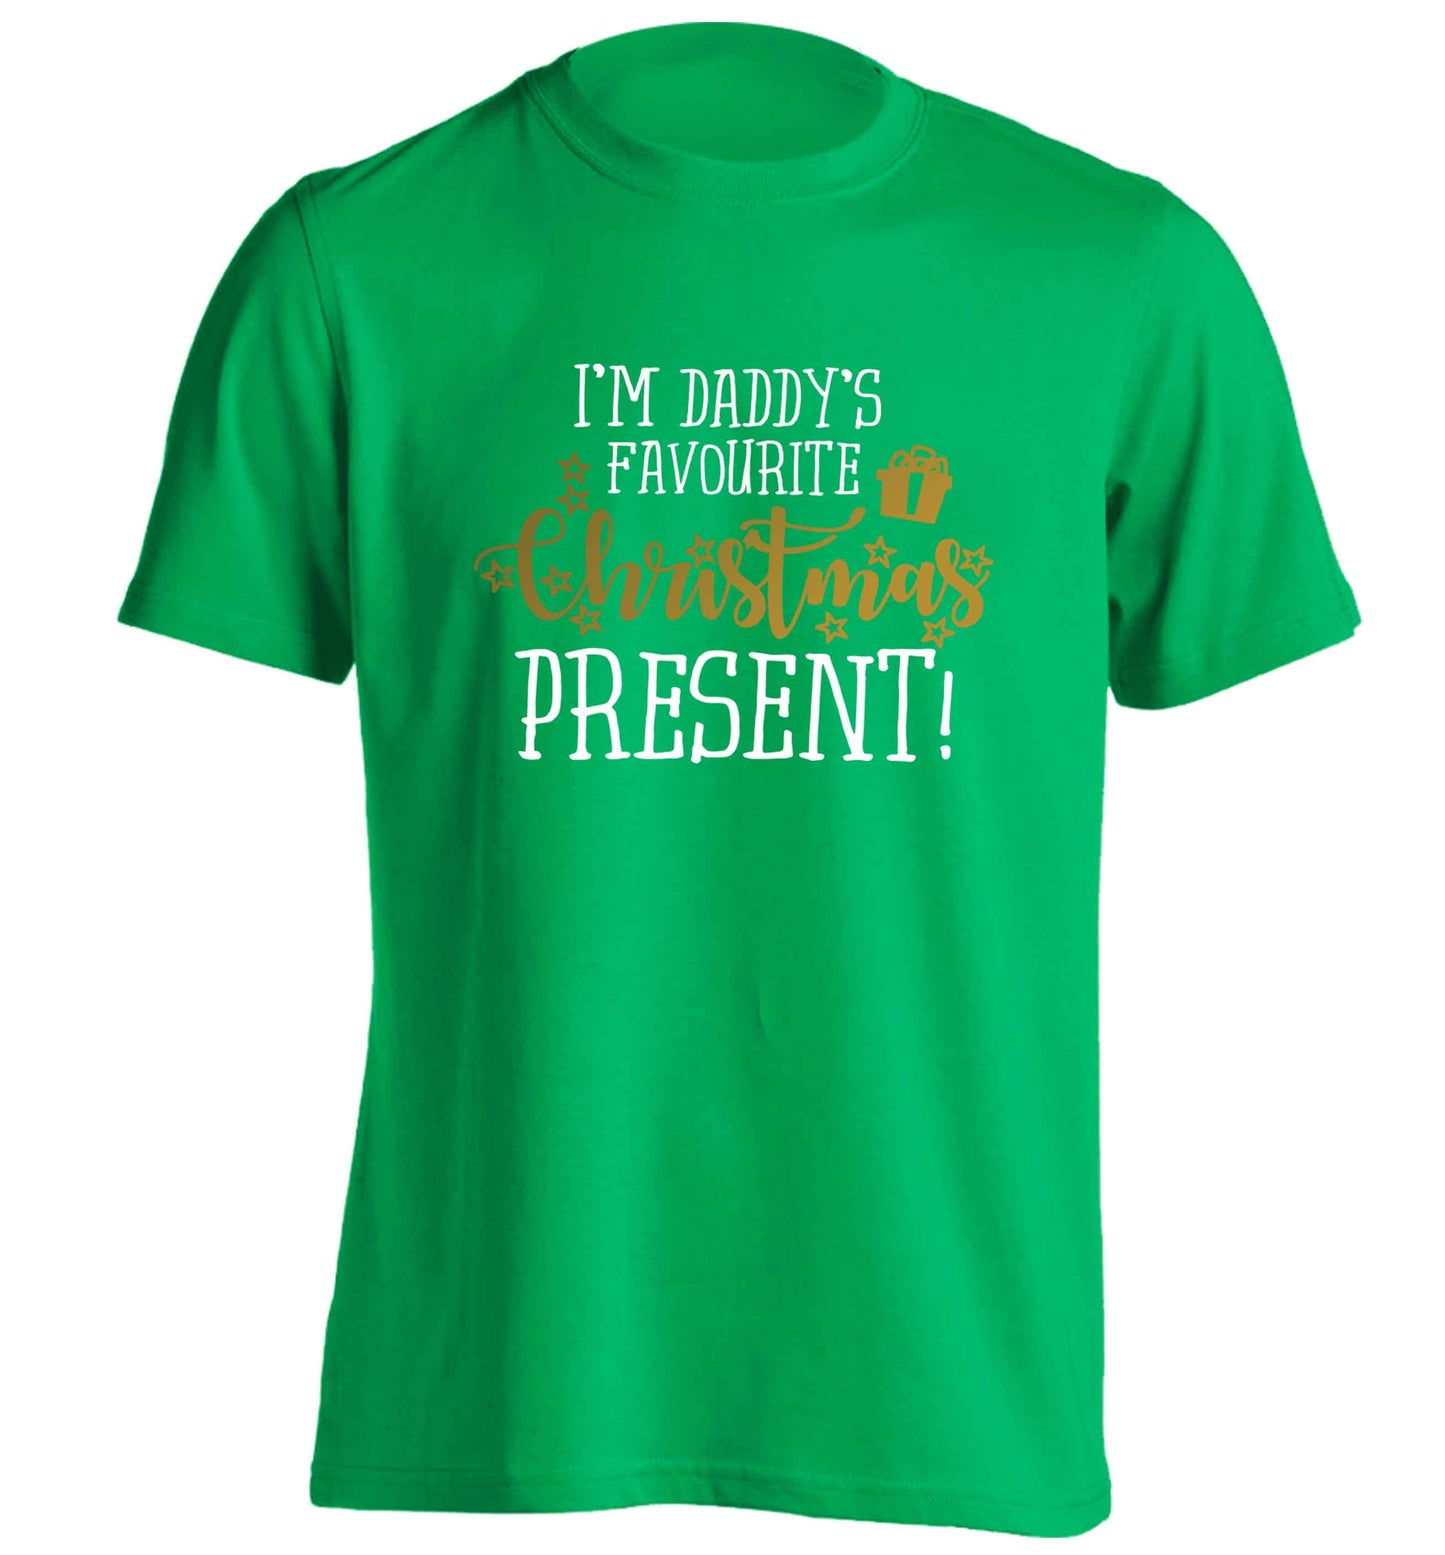 Daddy's favourite Christmas present adults unisex green Tshirt 2XL